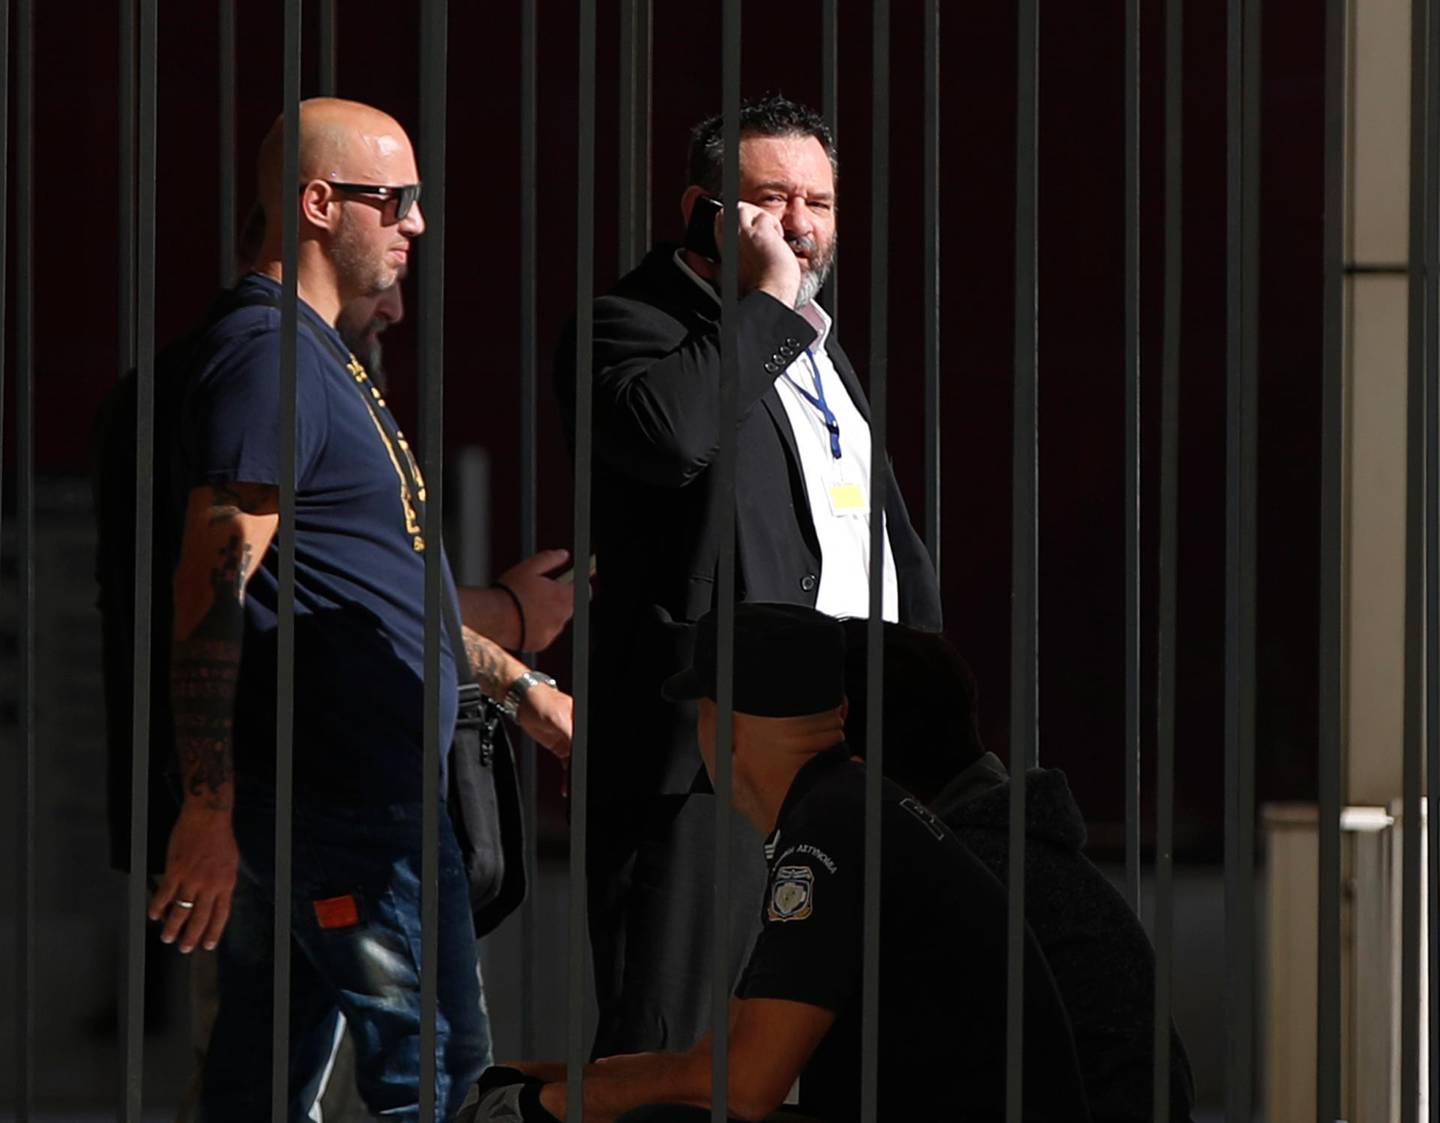 European Parliament member Ioannis Lagos, center, who had been found guilty along with others of leading a criminal organization, and face five to 15 years in prison, uses his mobile phone outside a court, waiting for his sentencing in Athens, Monday, Oct. 12, 2020. An Athens court has extended to Monday a sentencing hearing for leading members and associates of Greece's far-right Golden Dawn convicted earlier this week of multiple crimes. (AP Photo/Thanassis Stavrakis)